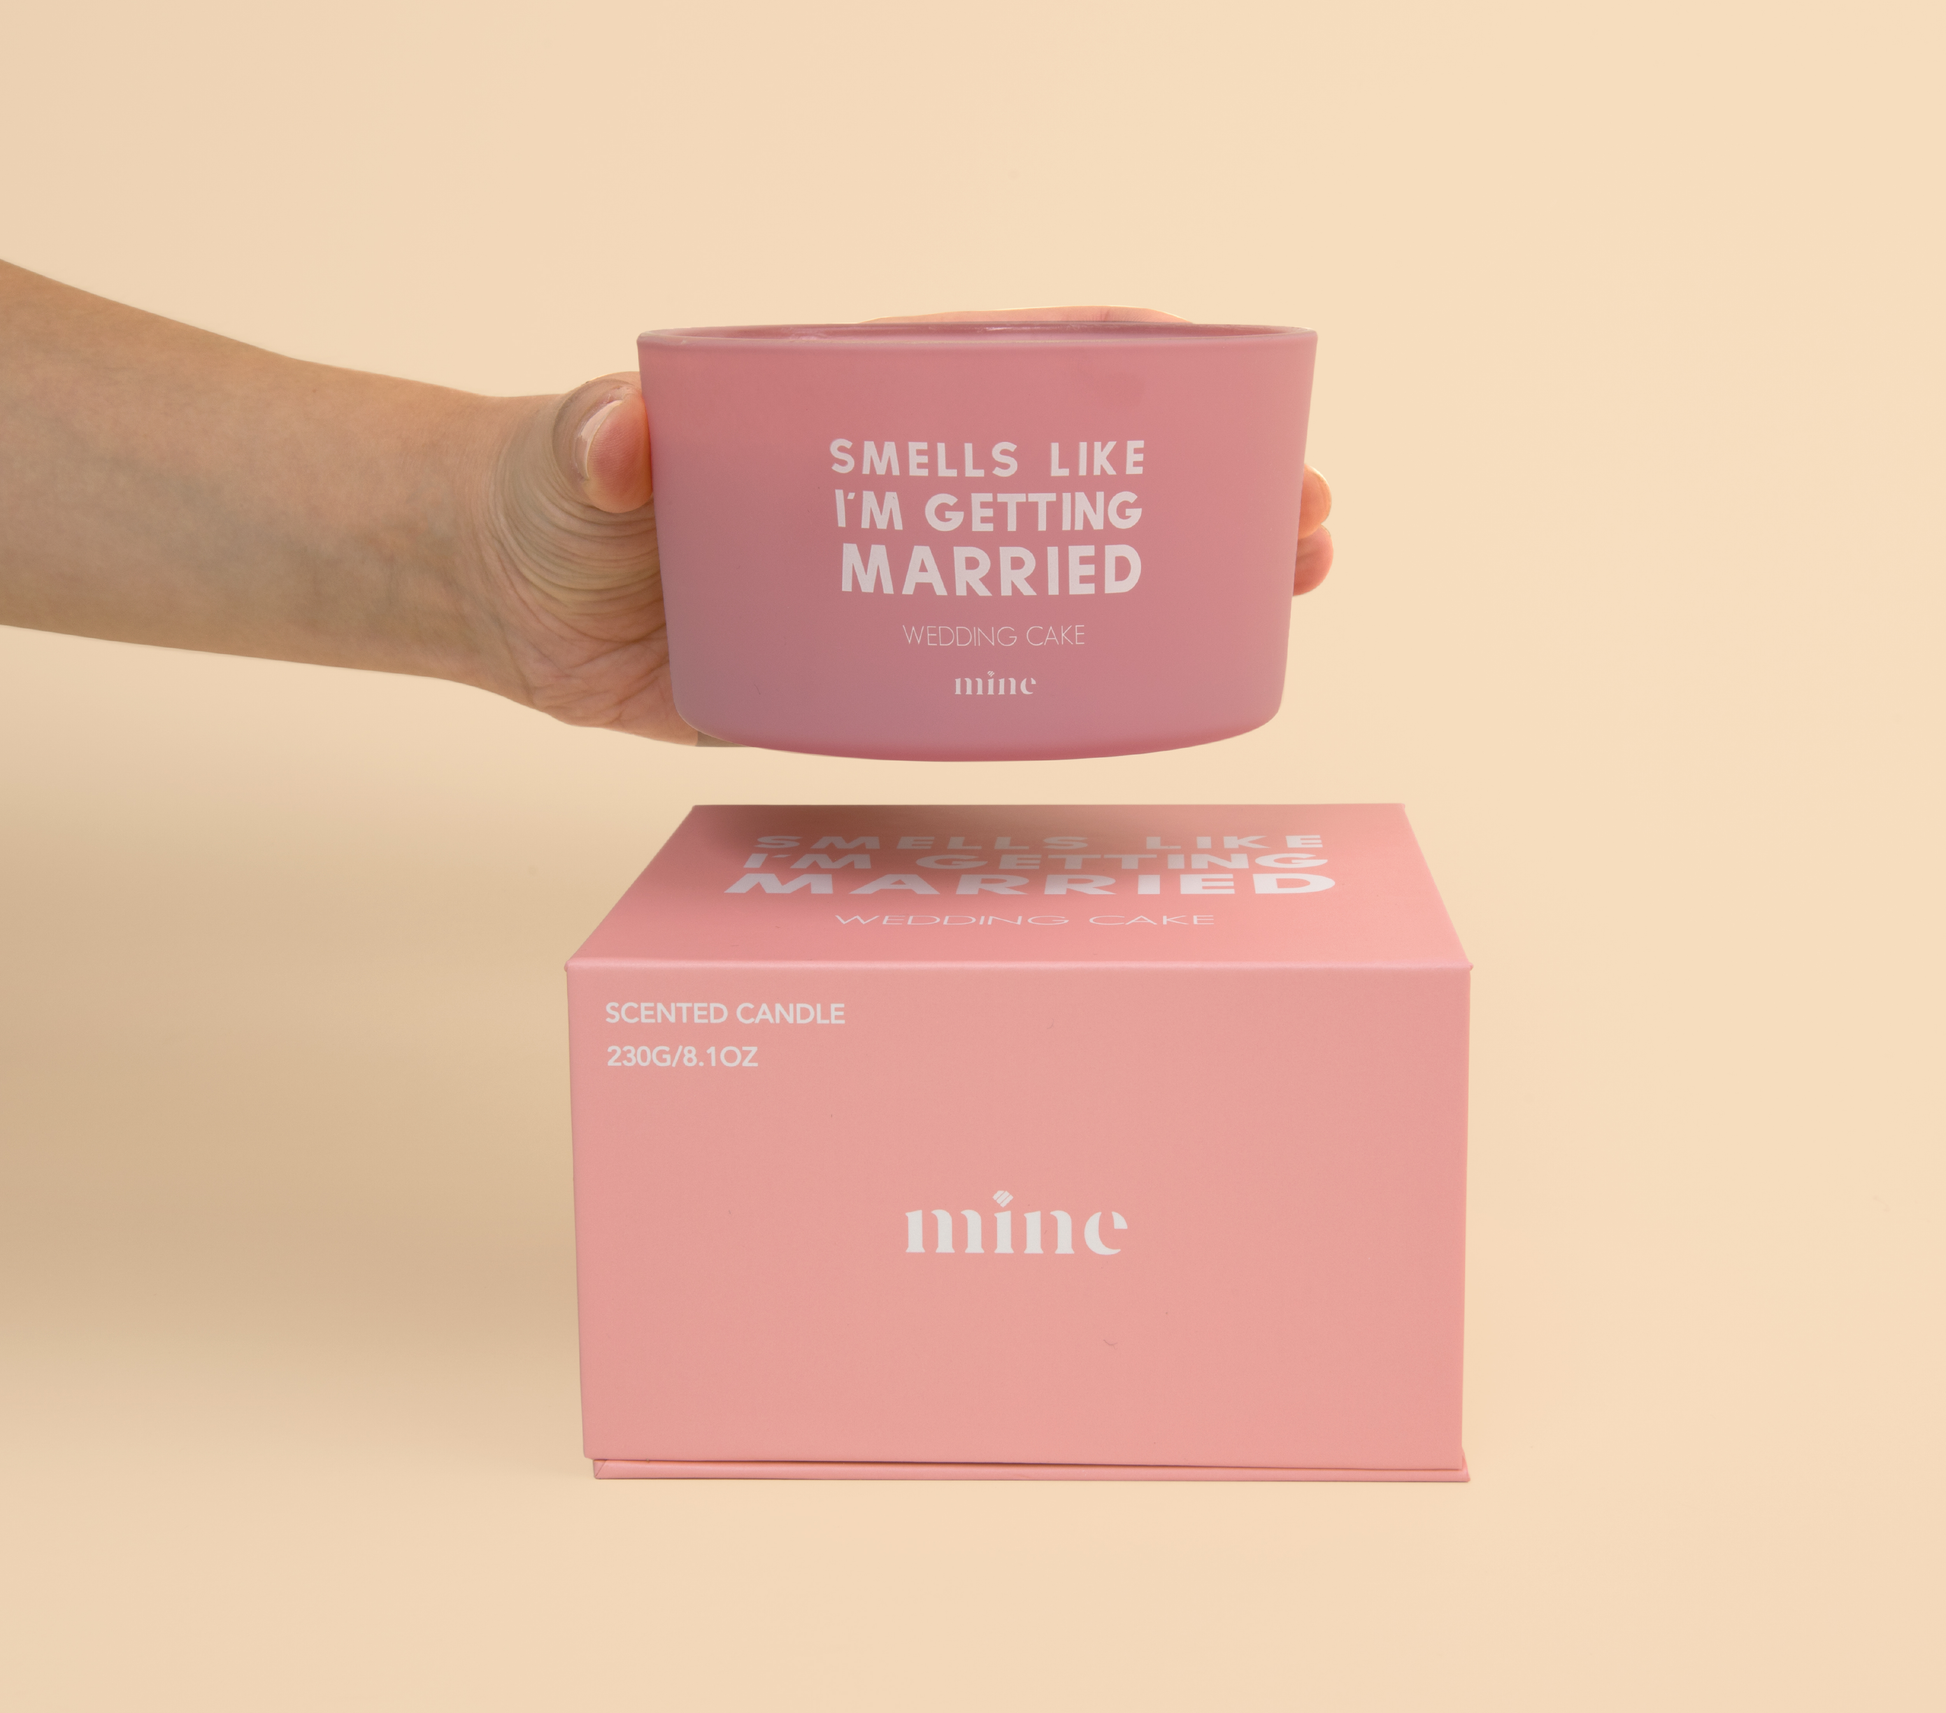 Wedding Cake Candle - The Mine Company - Smells Like I'm Getting Married - Pink Candle being held above gift box